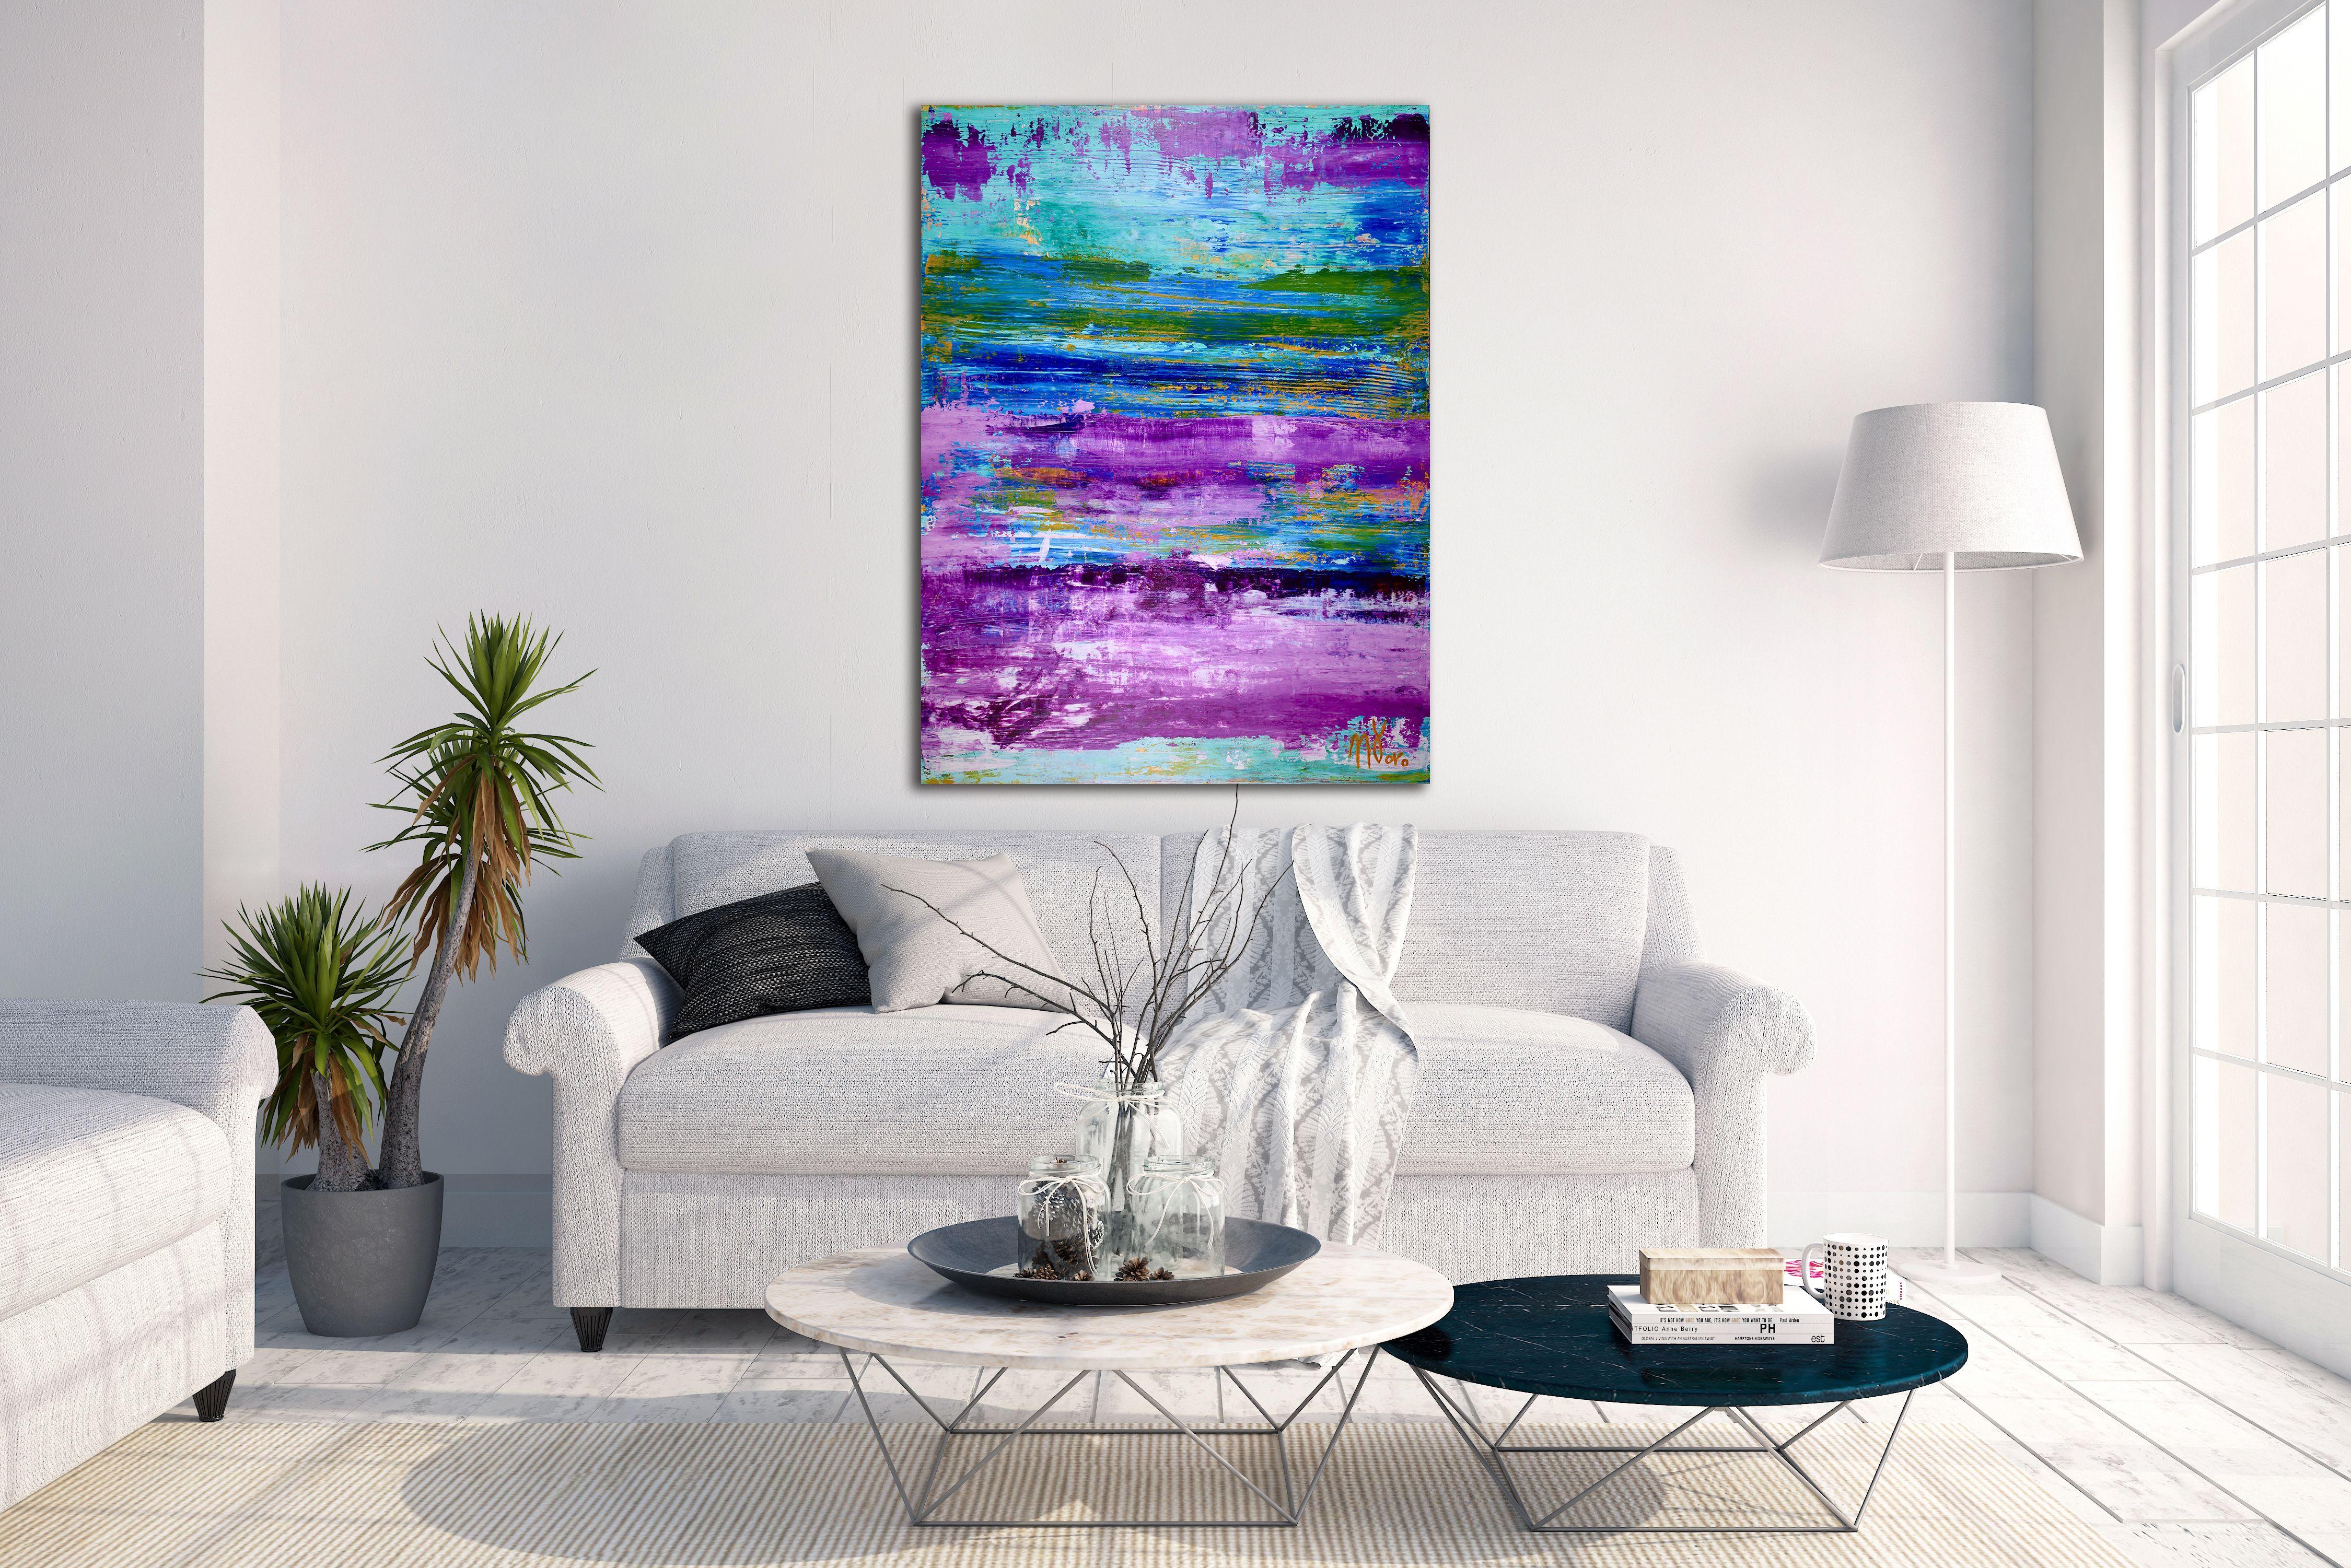 Thick layered colorfield style piece with vibrant shades of turquoise green and blue, yellow undertones and gestural purple paint strikes. Contemplative, calming feel and lots of depth. This painting is textured and layered! High quality Golden